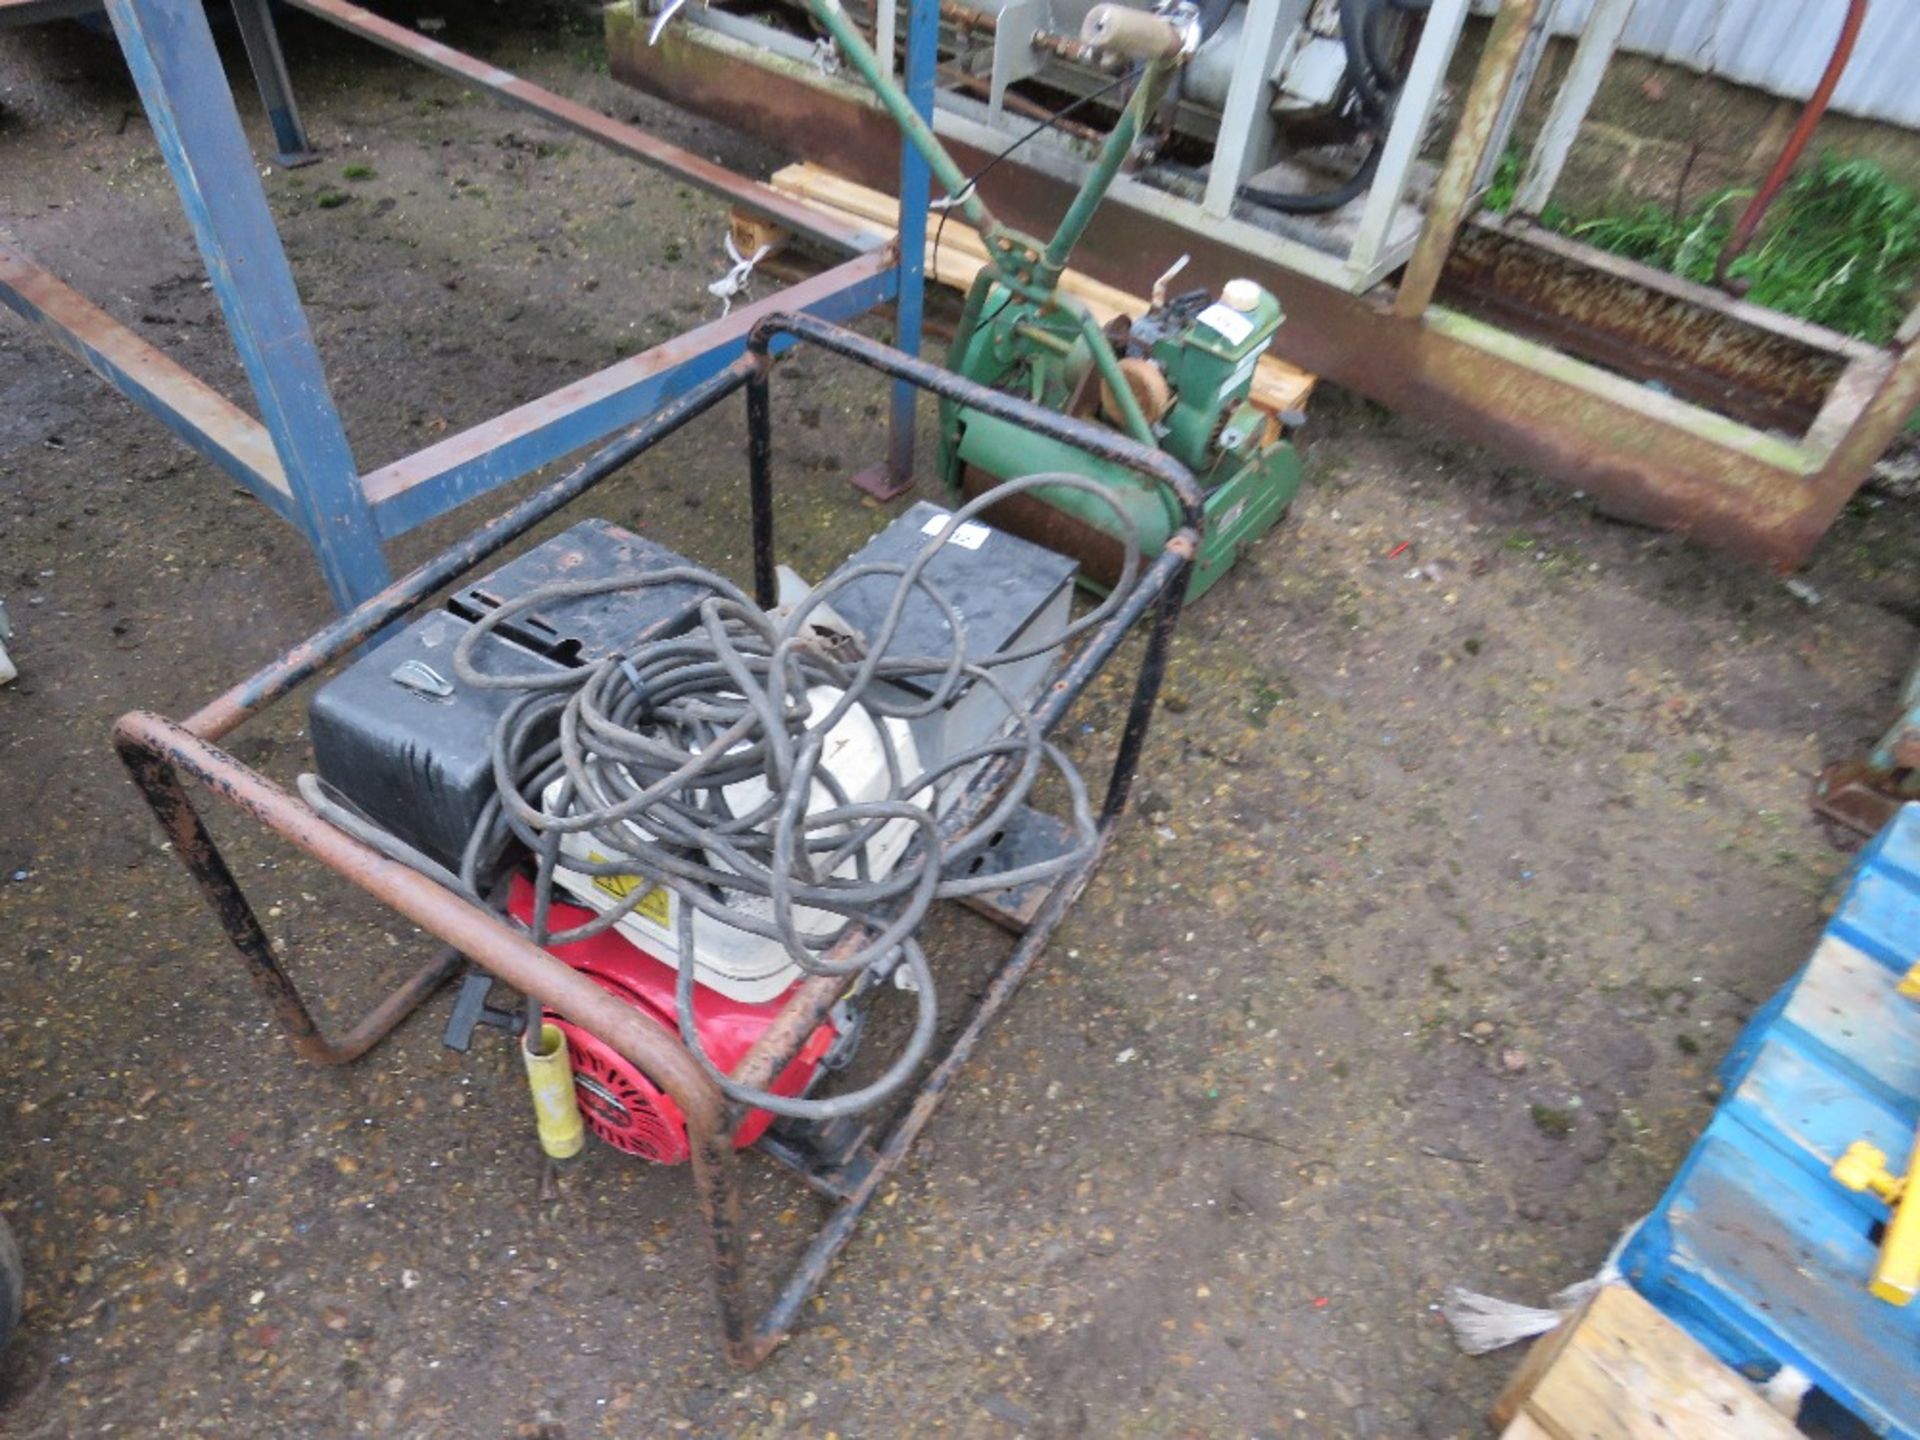 HONDA ENGINED WELDER UNIT WITH LEADS. WHEN TESTED WAS SEEN TO RUN, OUTPUT WAS NOT TESTED.